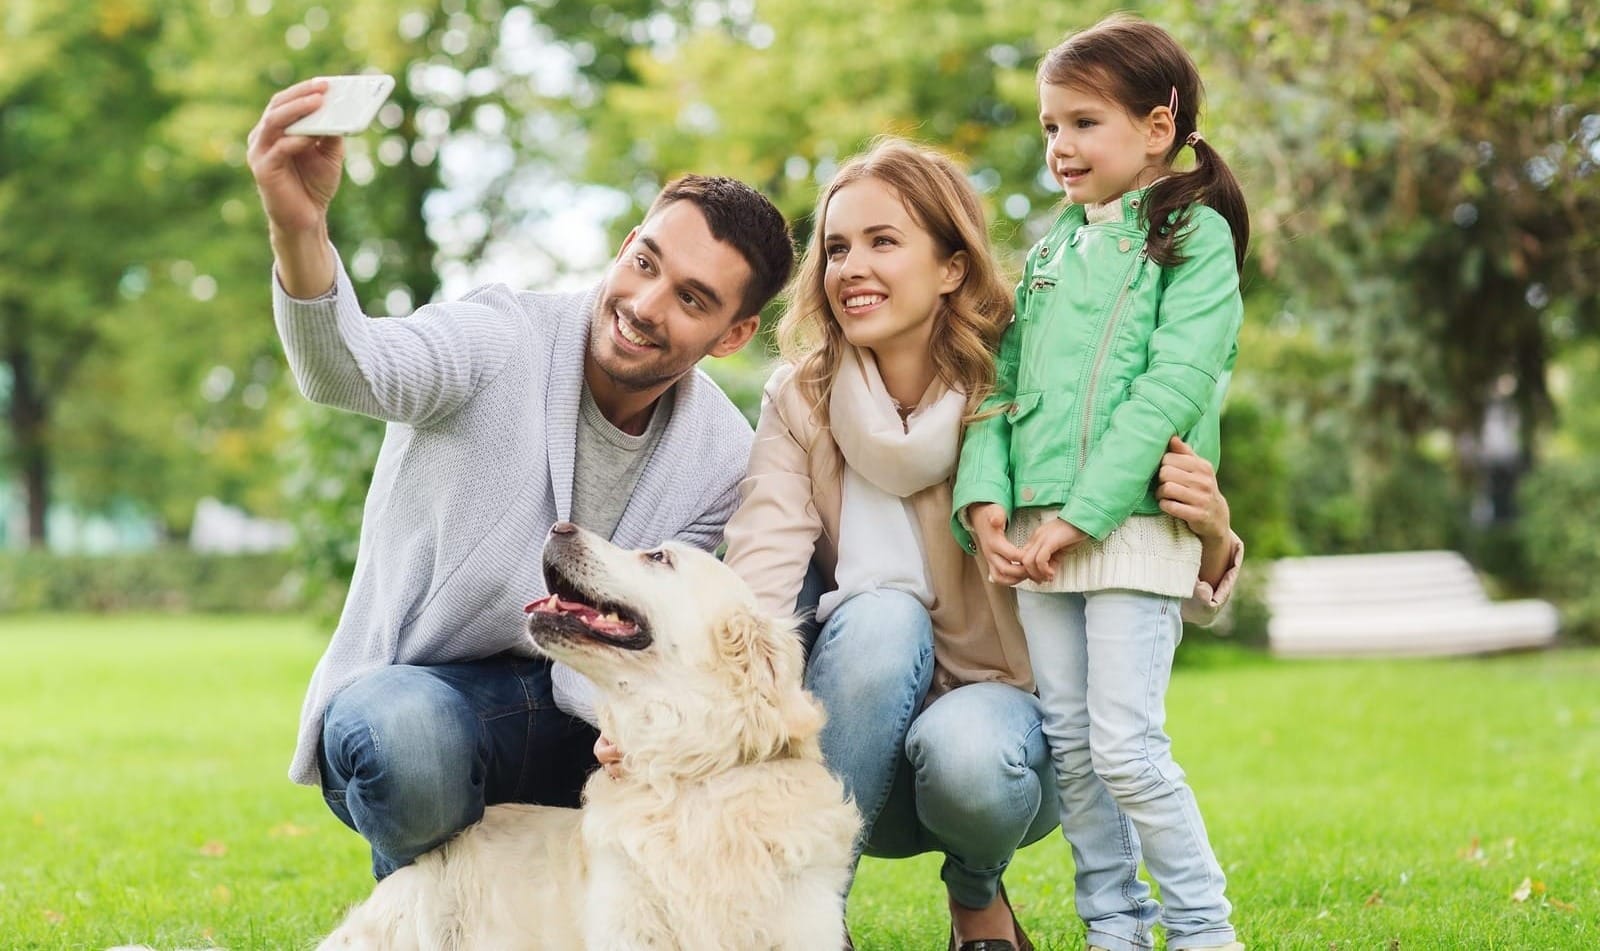 Outdoor Family Activities with Dog